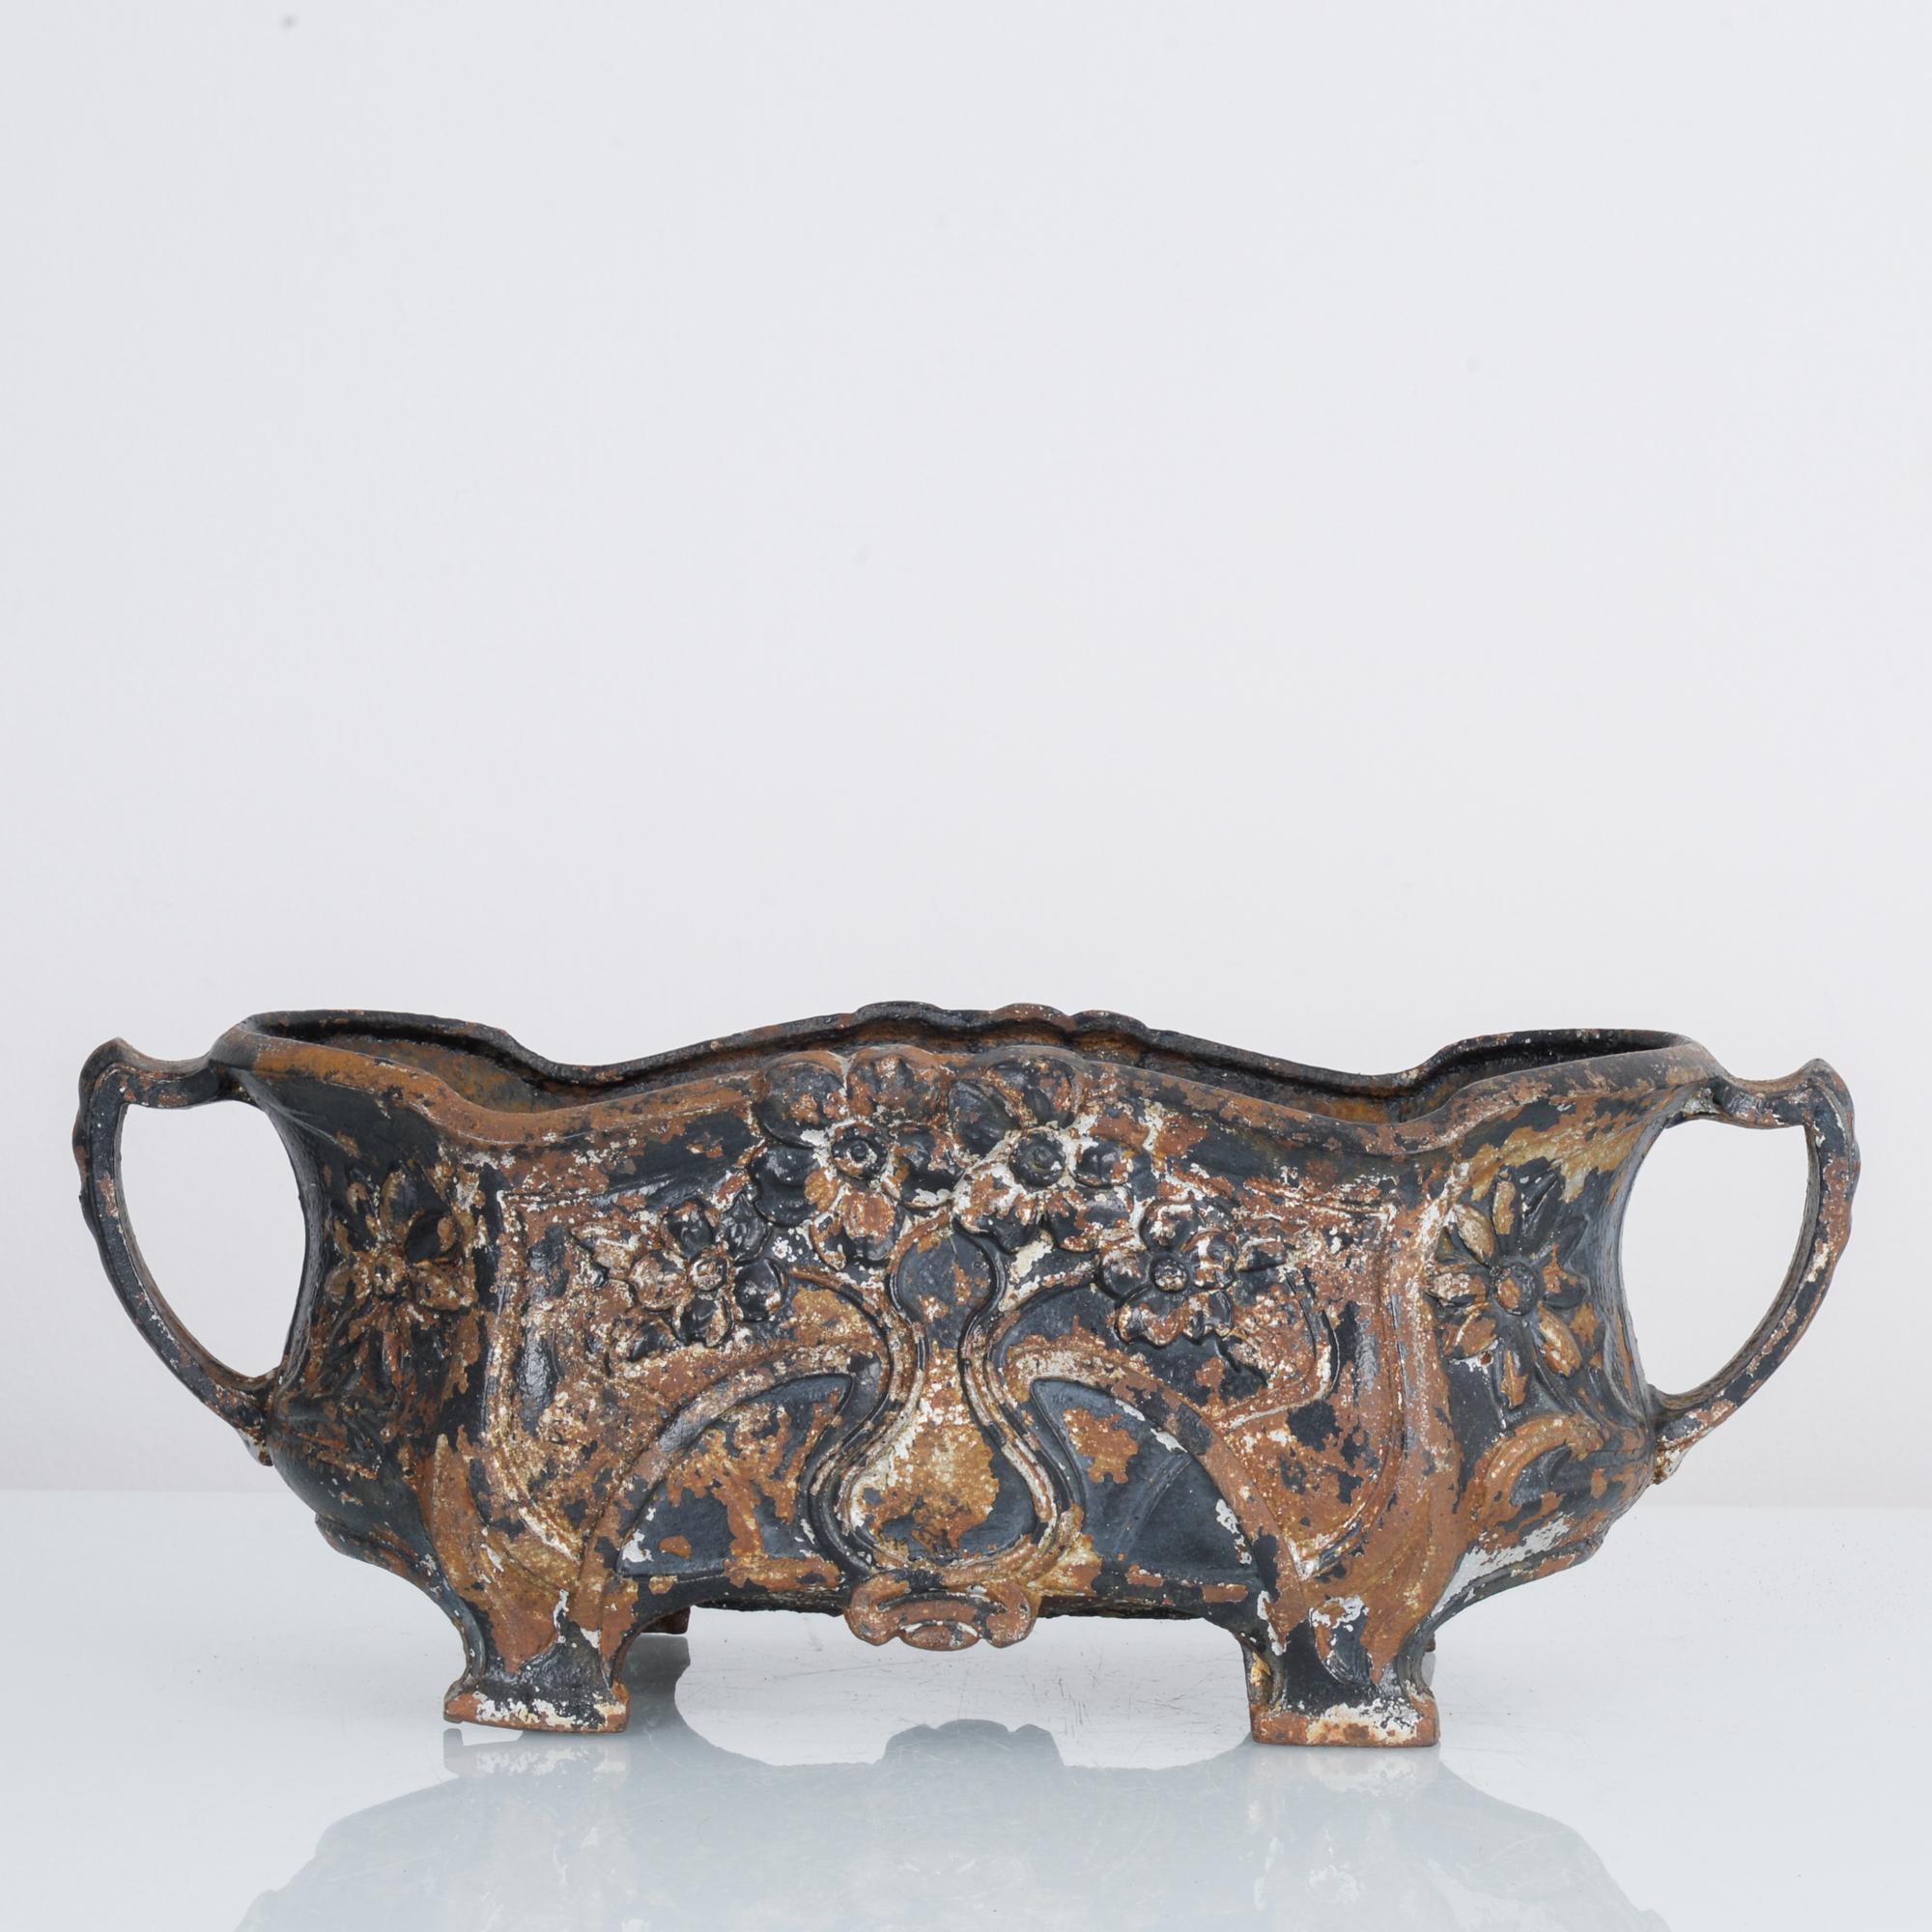 This cast iron planter was made in France, circa 1900. Originally painted black, it now displays a beautifully weathered patina. The floral designs and scalloped top give it a rustic and charming appearance. It features handles on the side and is